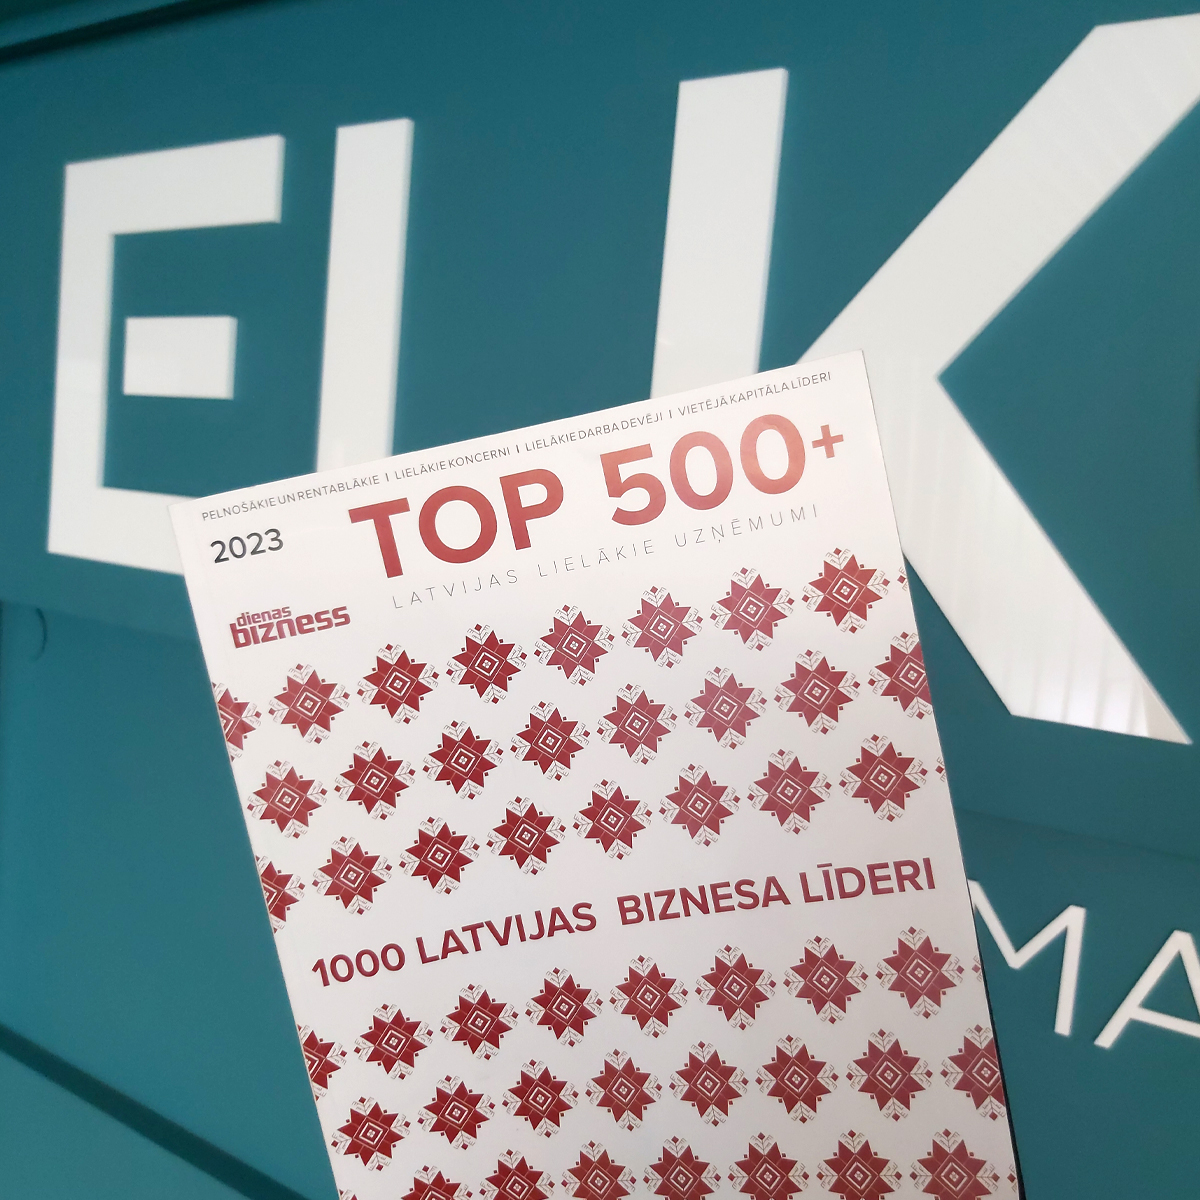 Latvia's largest companies have been announced. ELKO ranks as:
🏆 No.1 enterprise in Latvia by consolidated turnover
🏆 No.8 enterprise in Latvia by turnover of the local entity
🏆 No.1 IT distributor and wholesaler in Latvia

#top500 #growsmarter